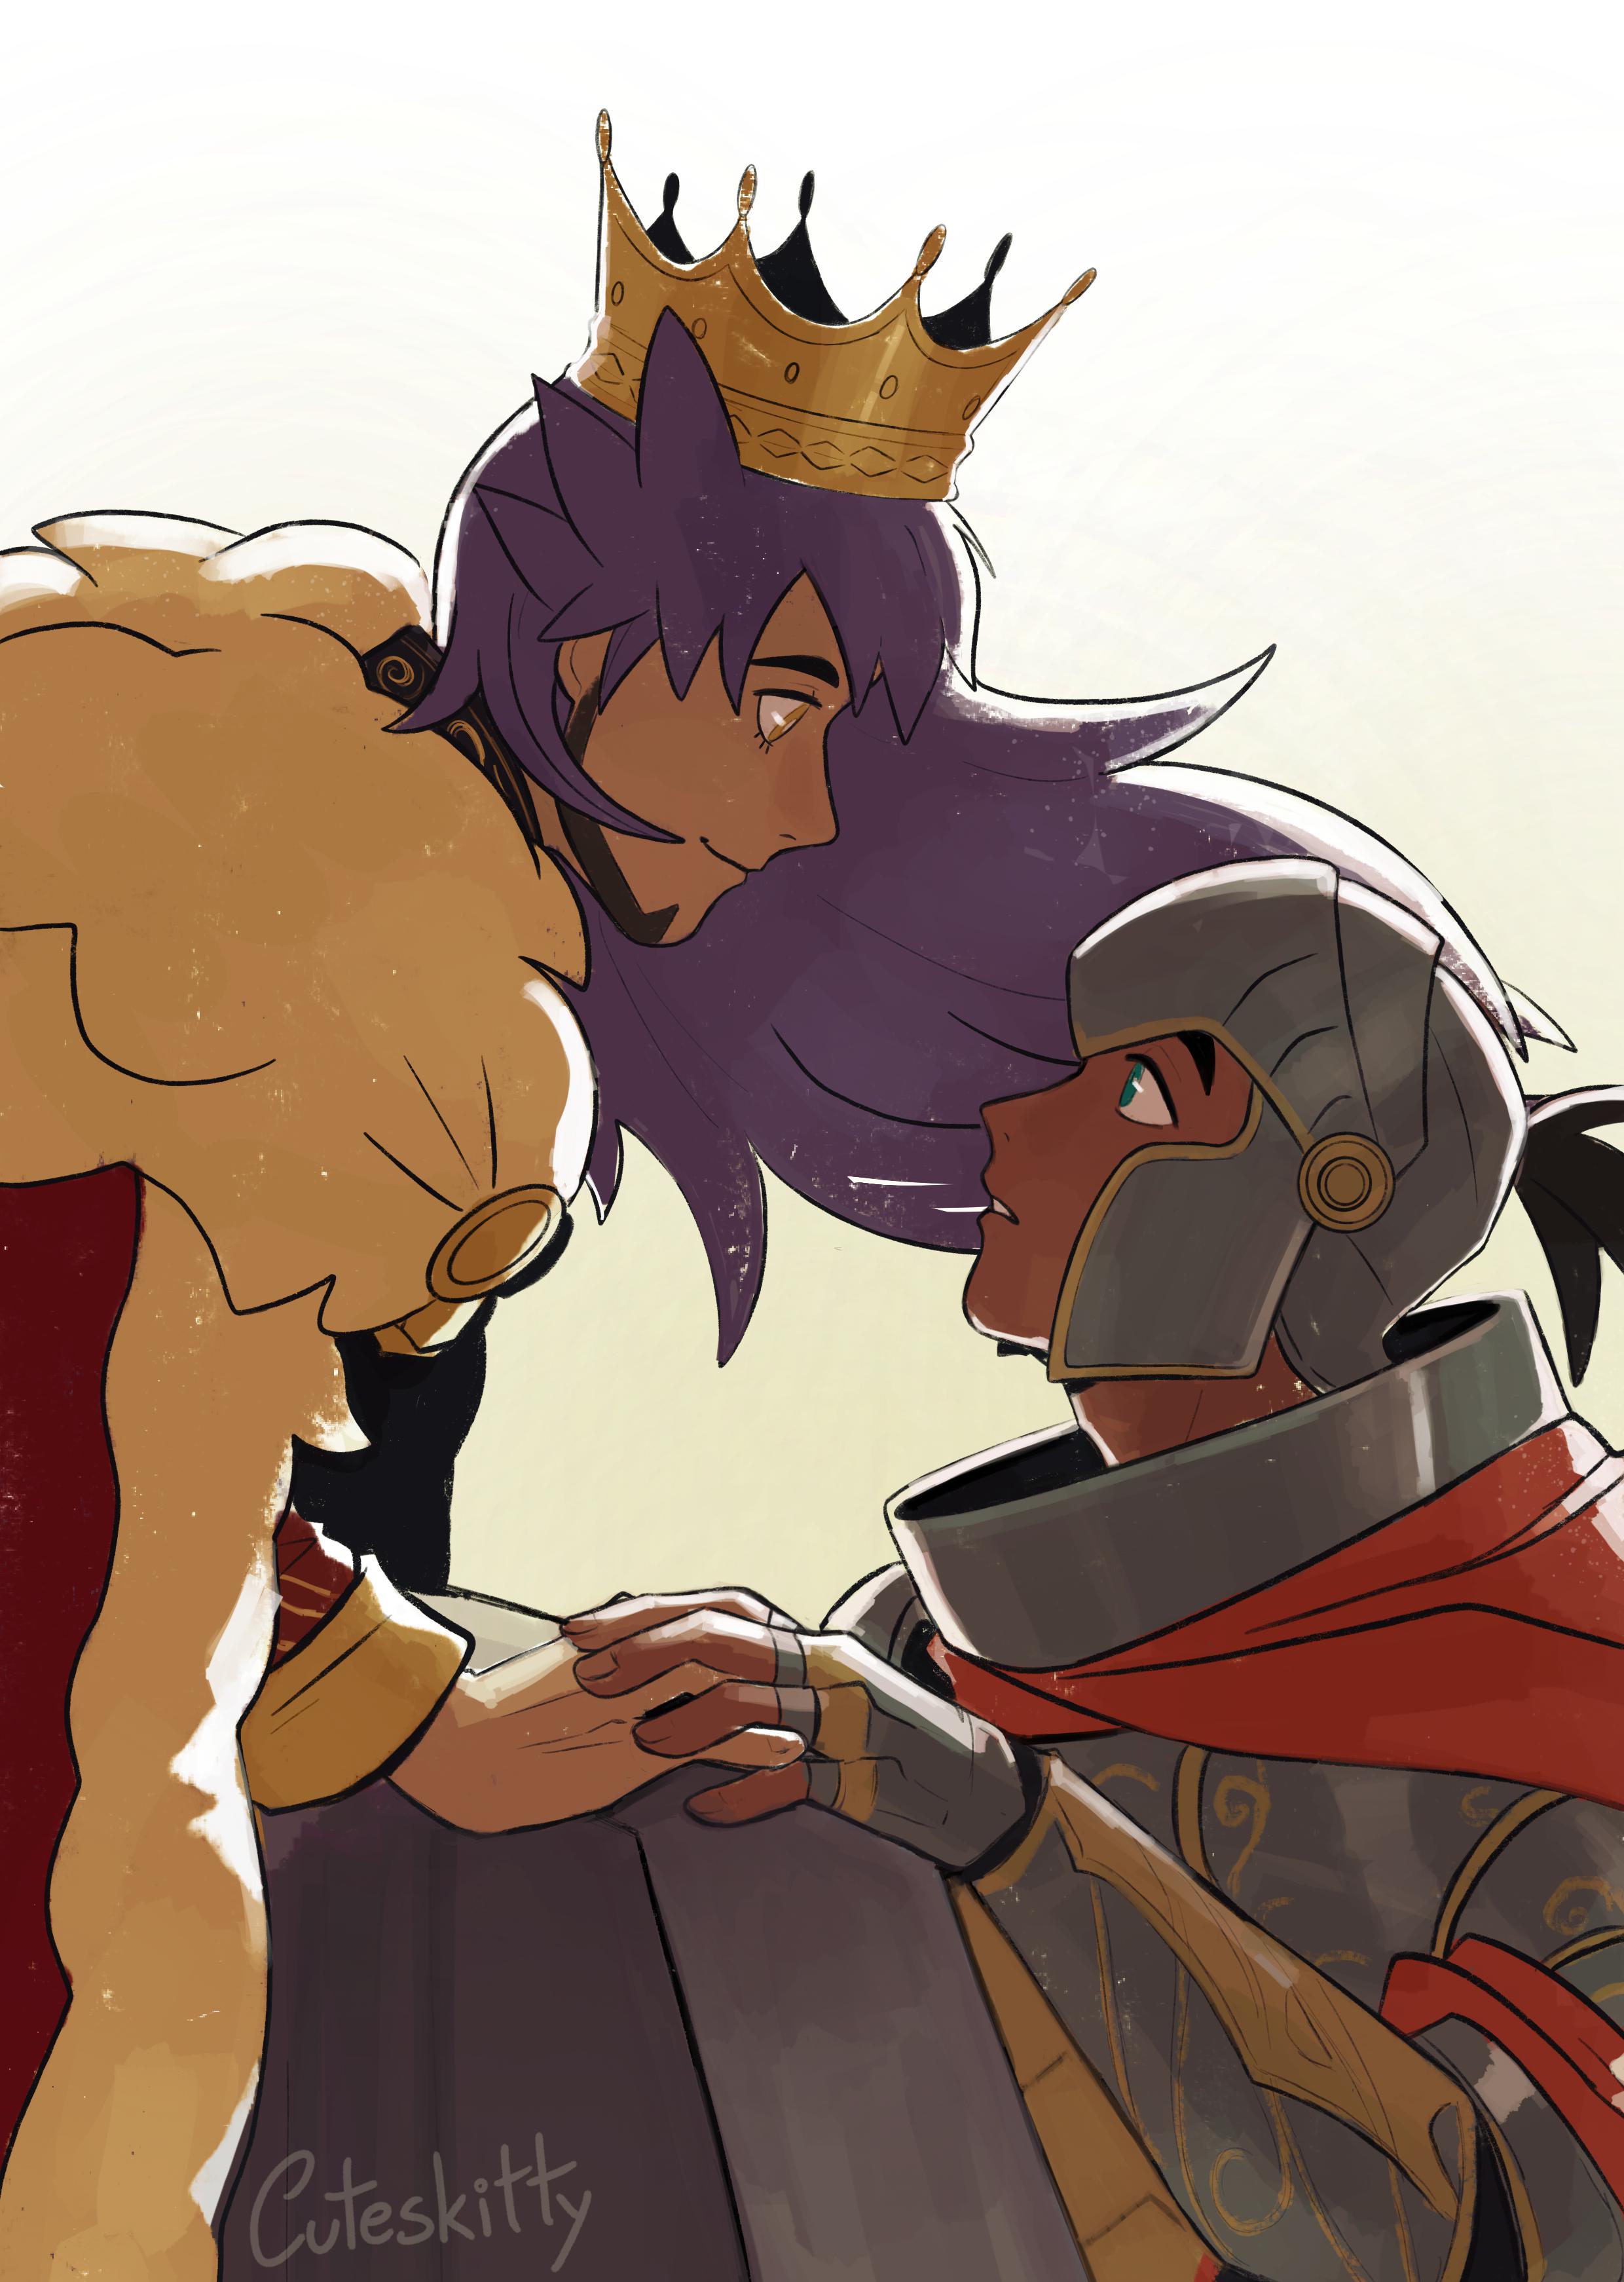 King and Knight